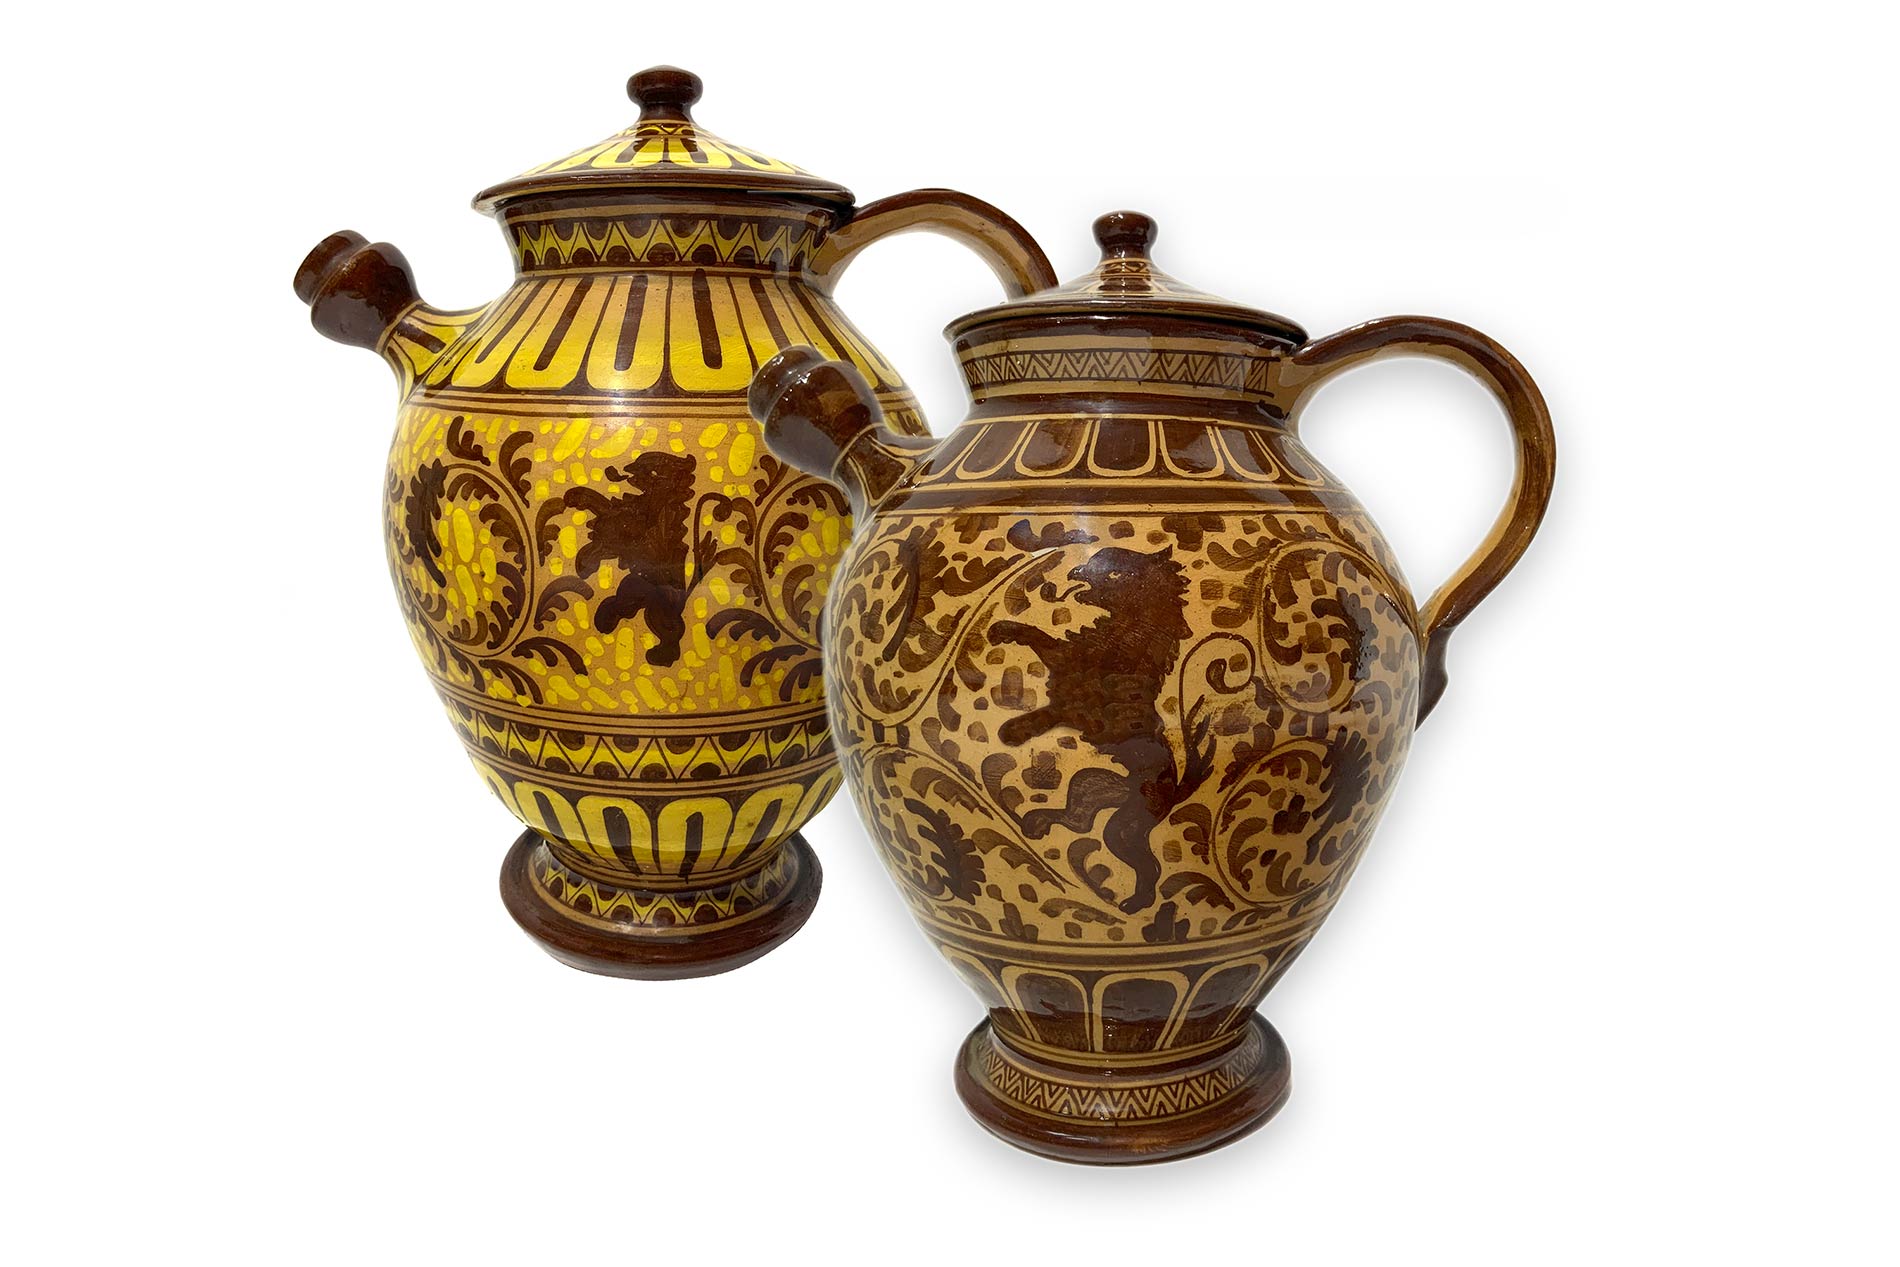 Pair of jugs with lid. In shades of brown and yellow. H 25 cm, 10 cm base.